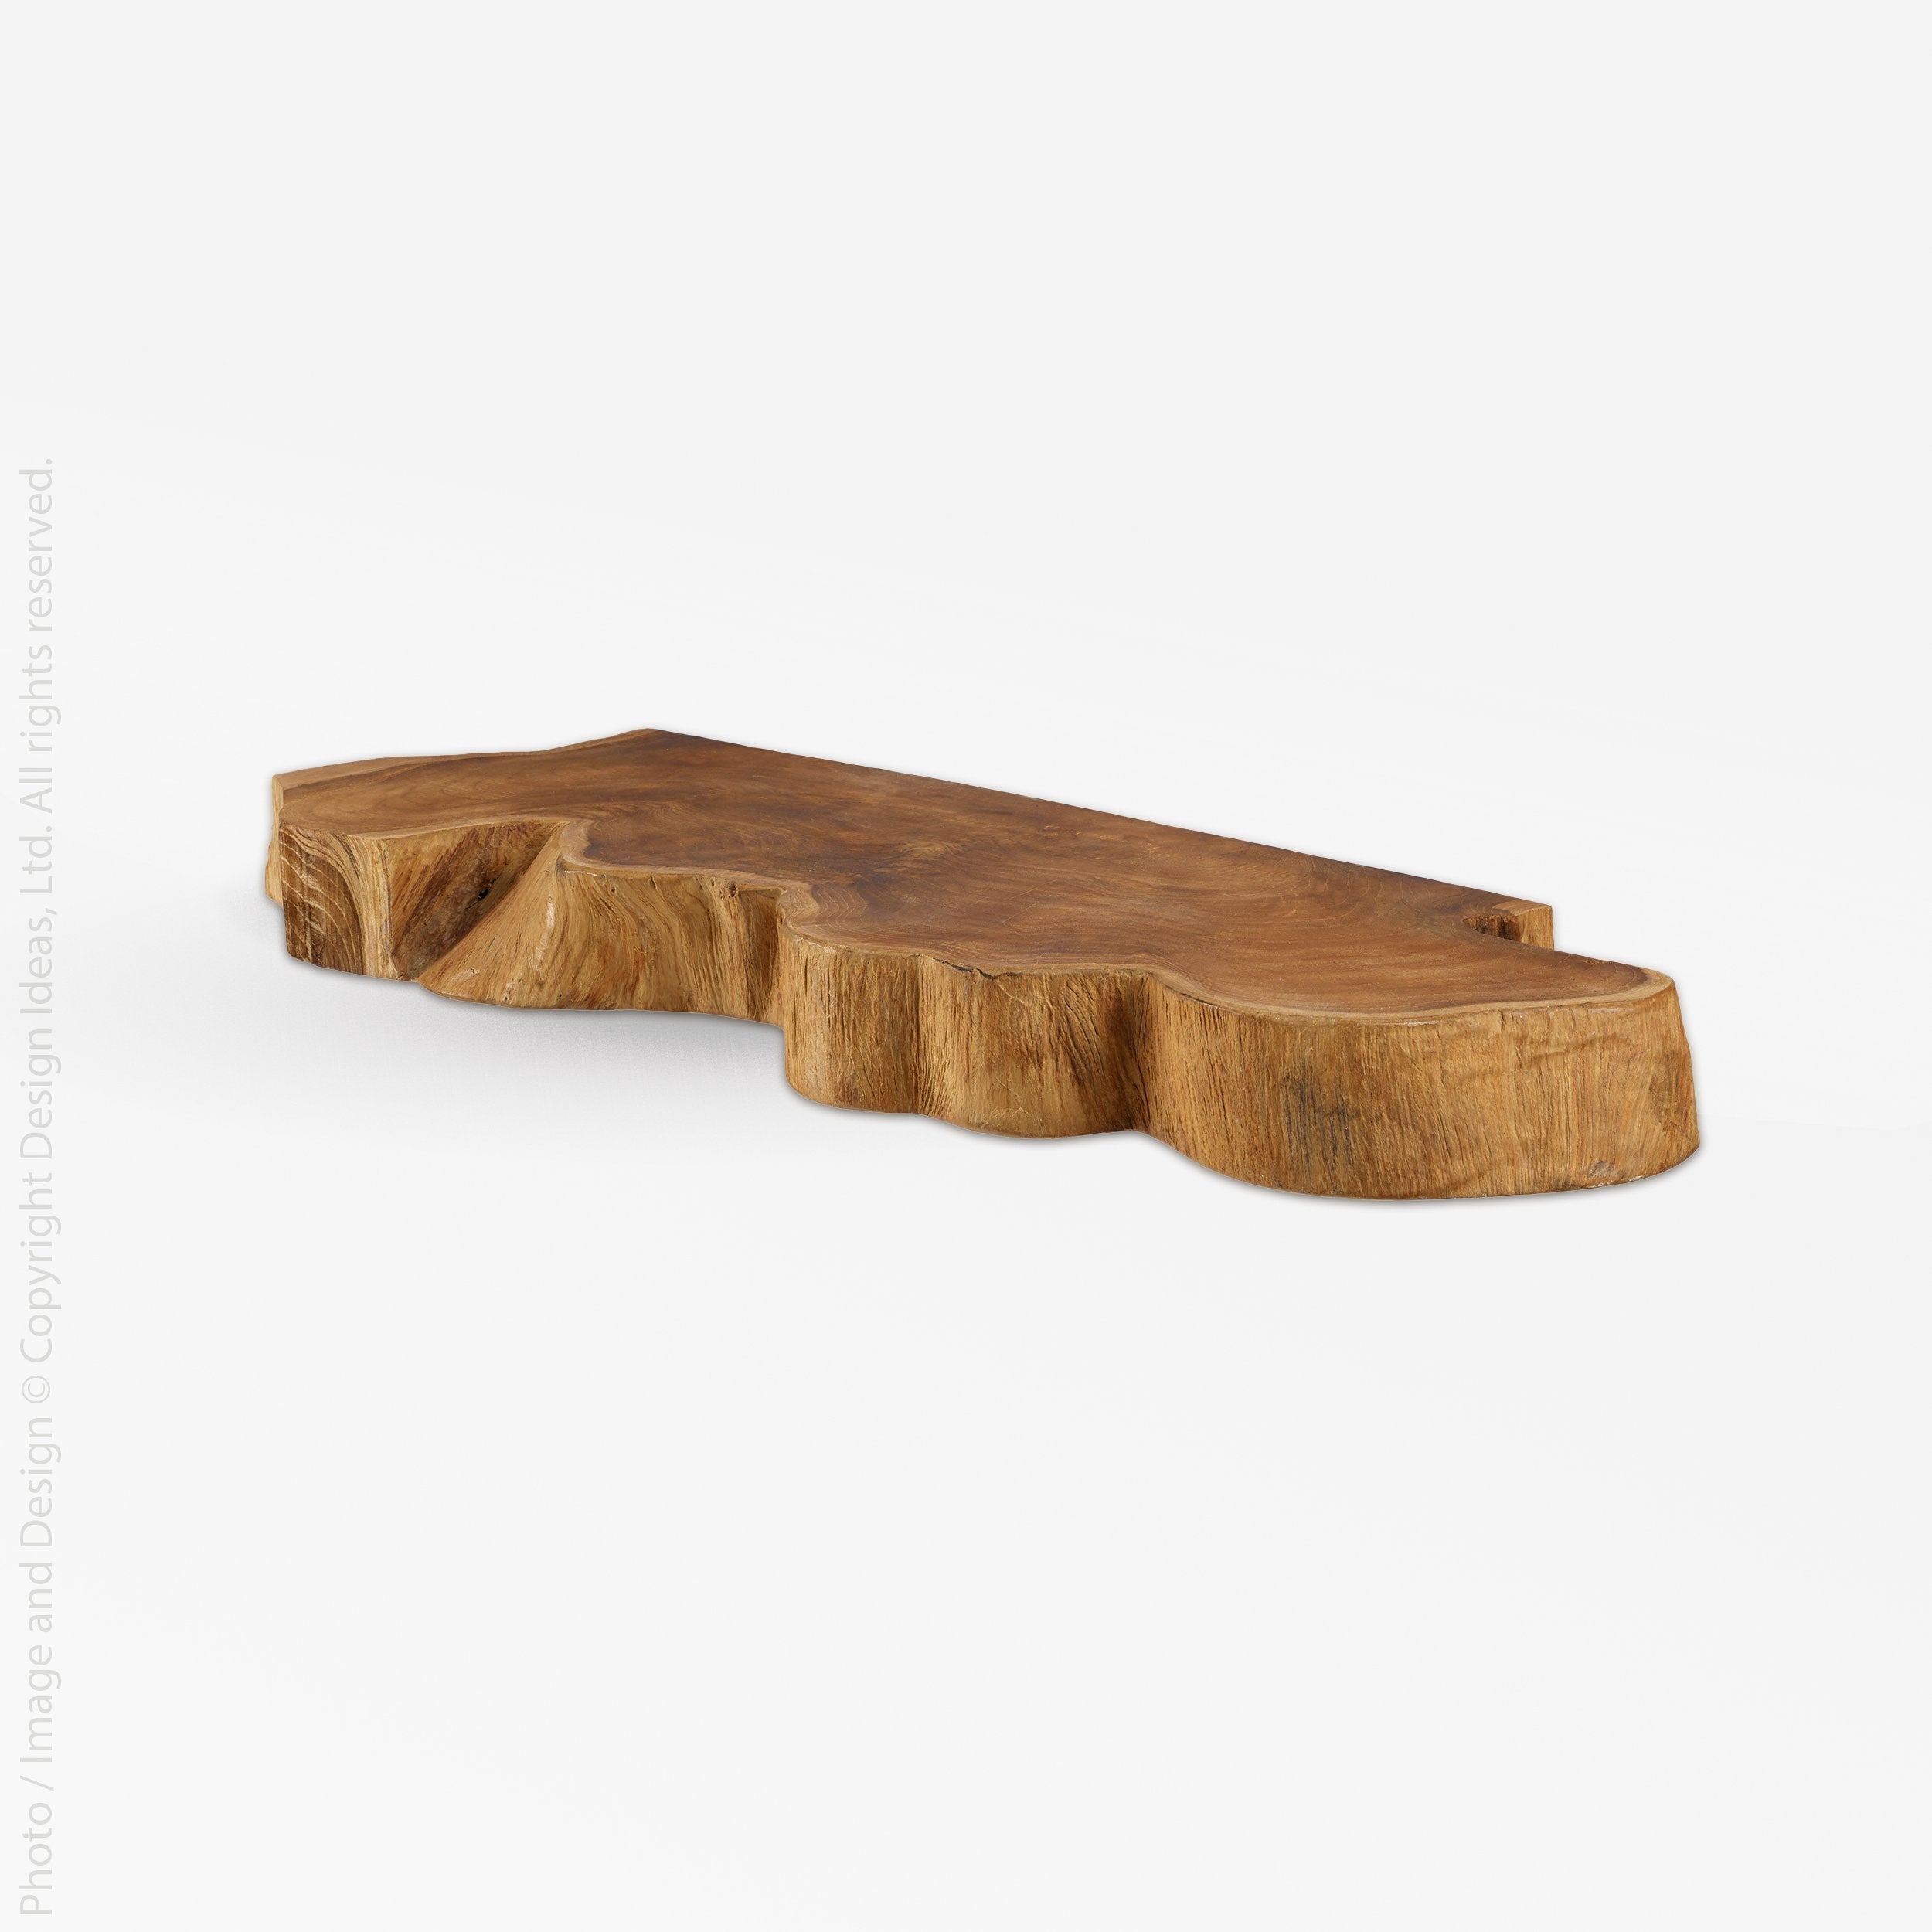 Takara Teak Live Edge Shelf (Large) - Black Color | Image 1 | From the Takara Collection | Exquisitely constructed with natural teak for long lasting use | This shelf is sustainably sourced | Available in natural color | texxture home